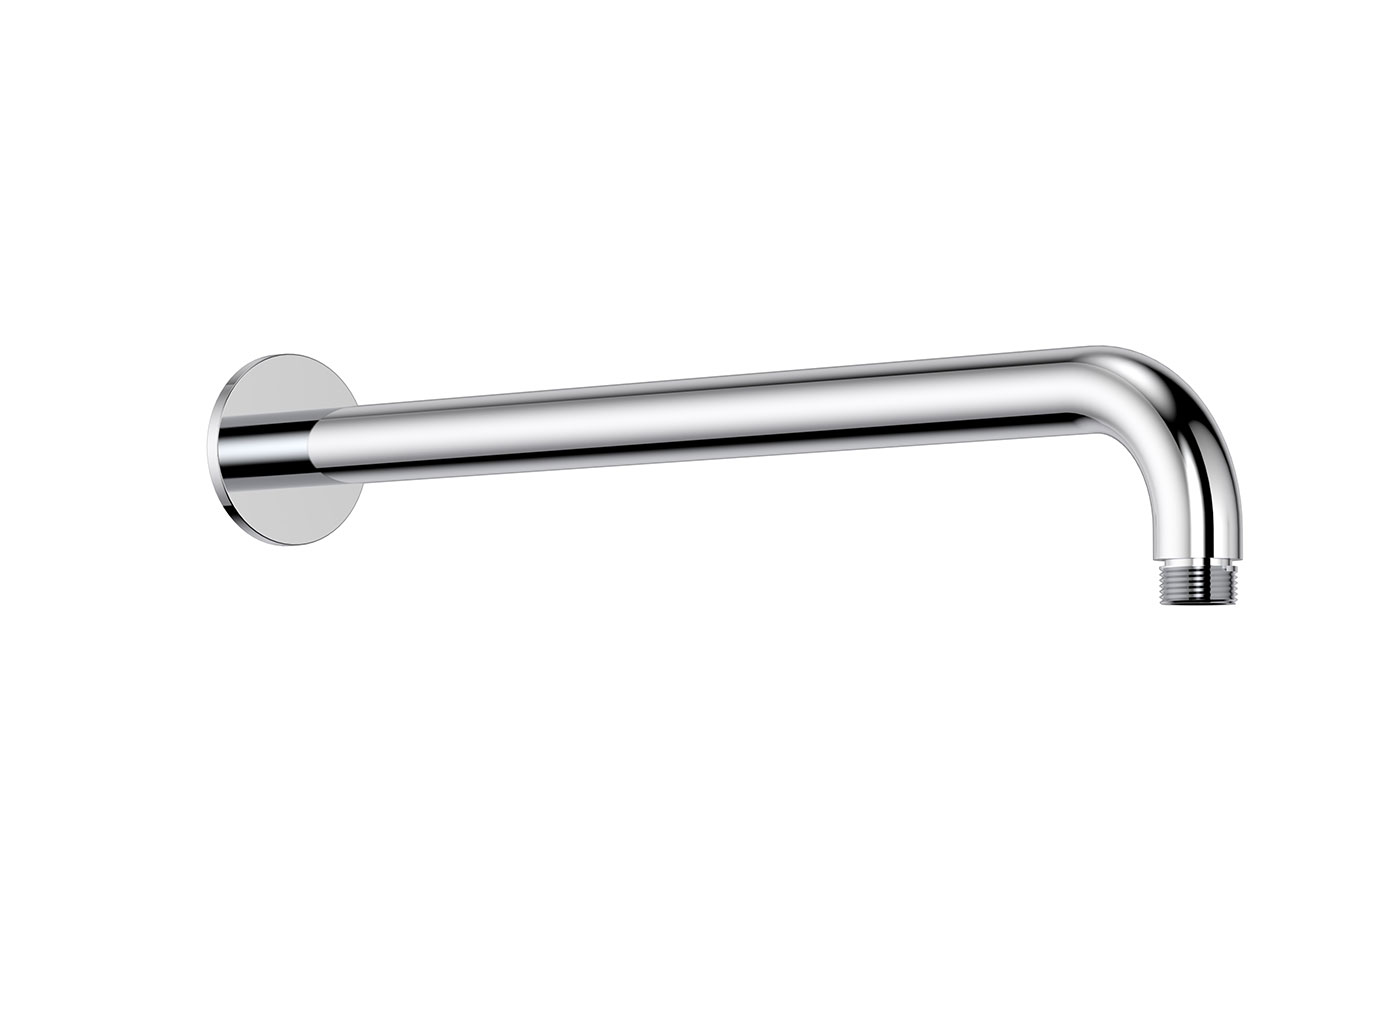 Clark's shower arms come in a variety of styles so you can create a bathroom space you love!